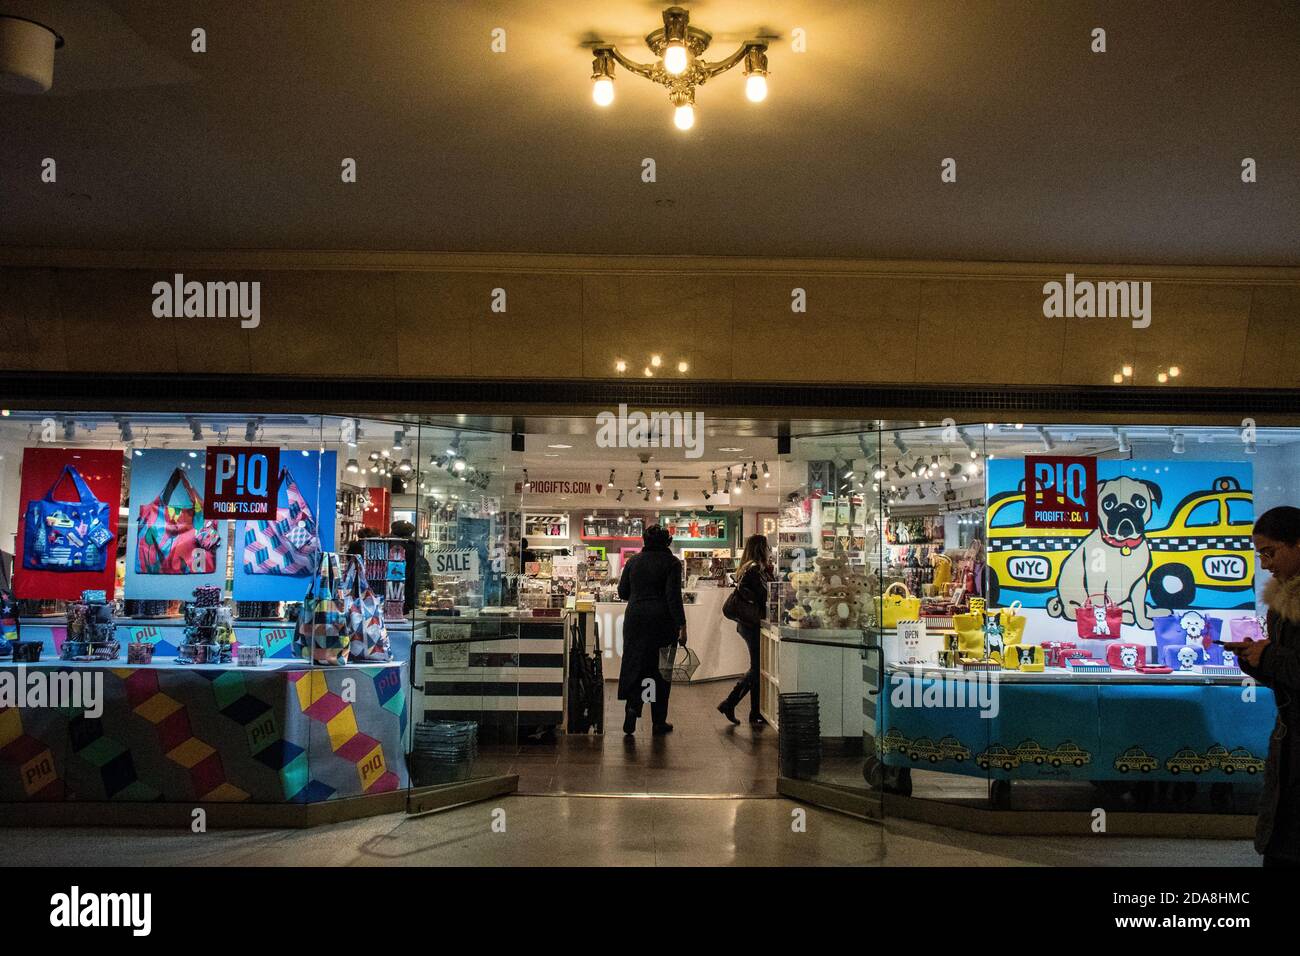 PIQ store in Grand Central Terminal, 42nd Street, New York City, New York, United States Stock Photo